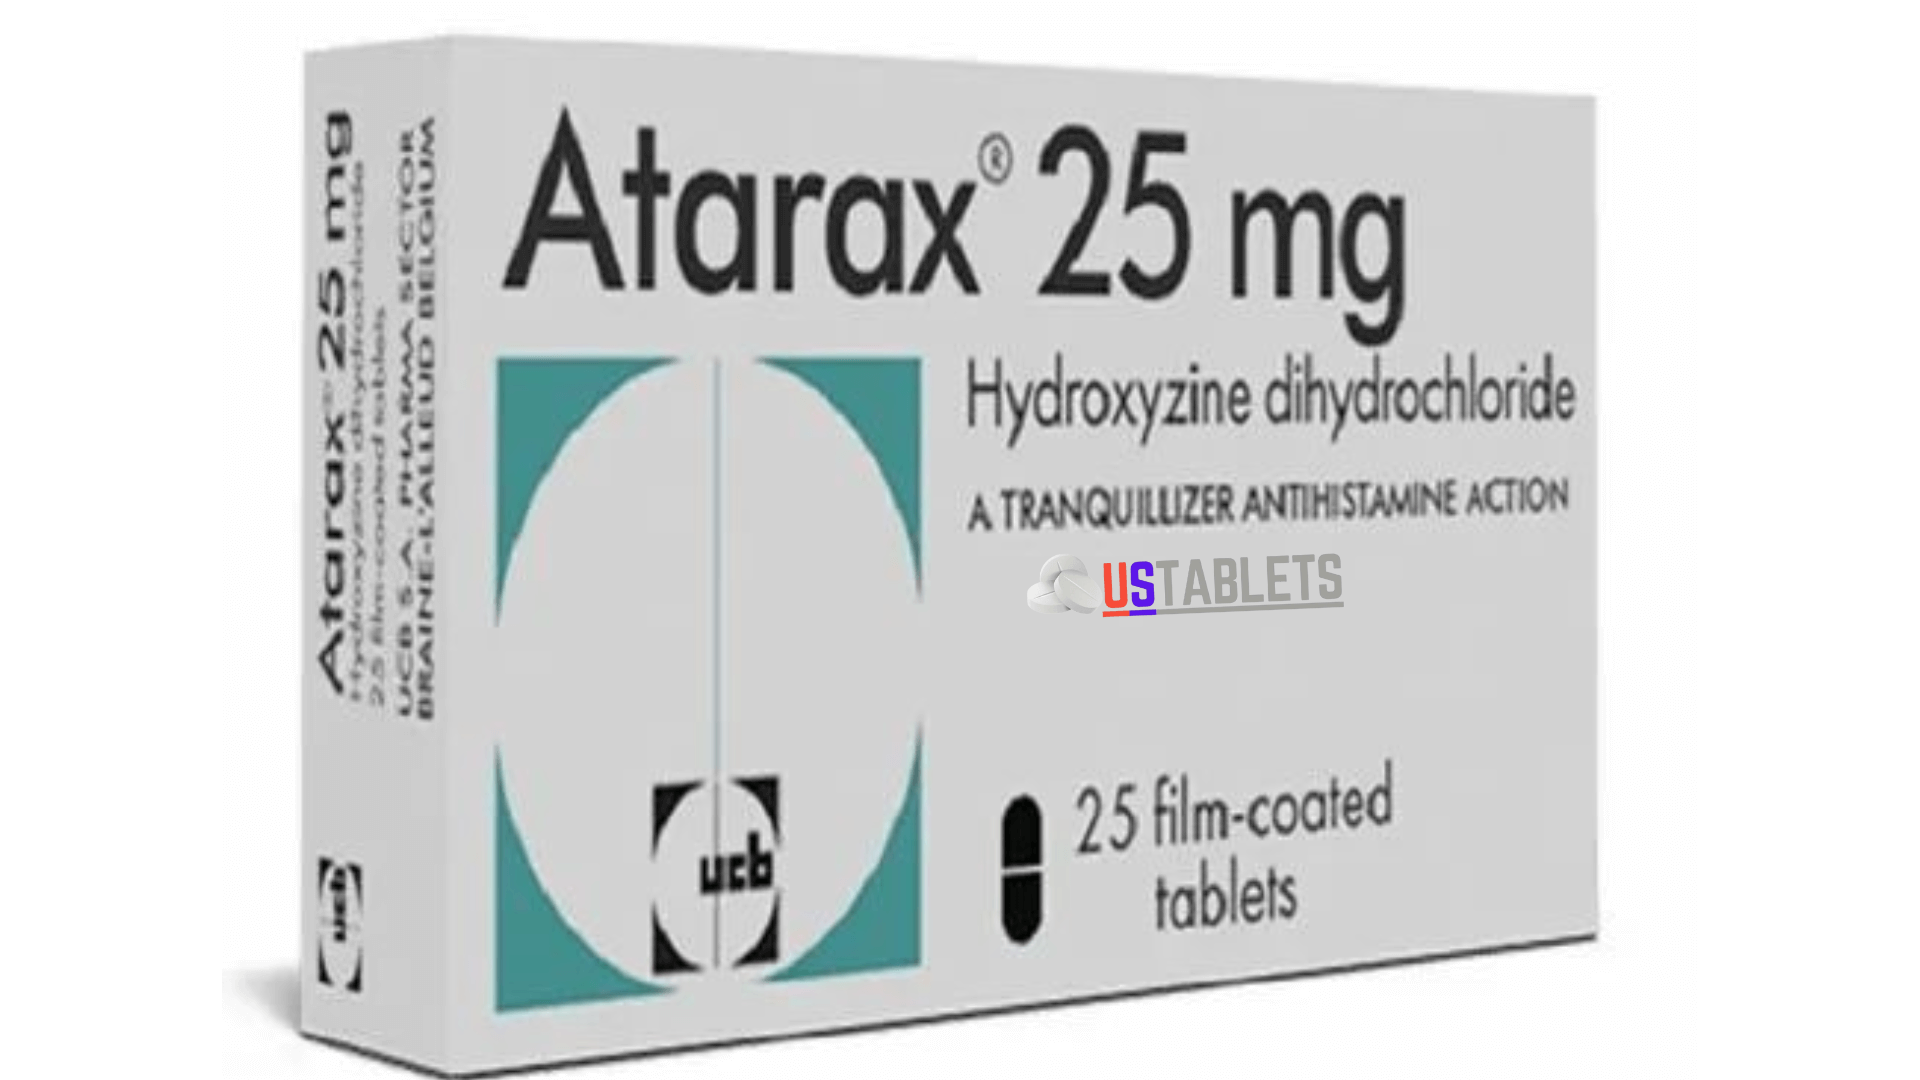 Atarax Tablet 25mg I Uses Side Effects, Price & Availability